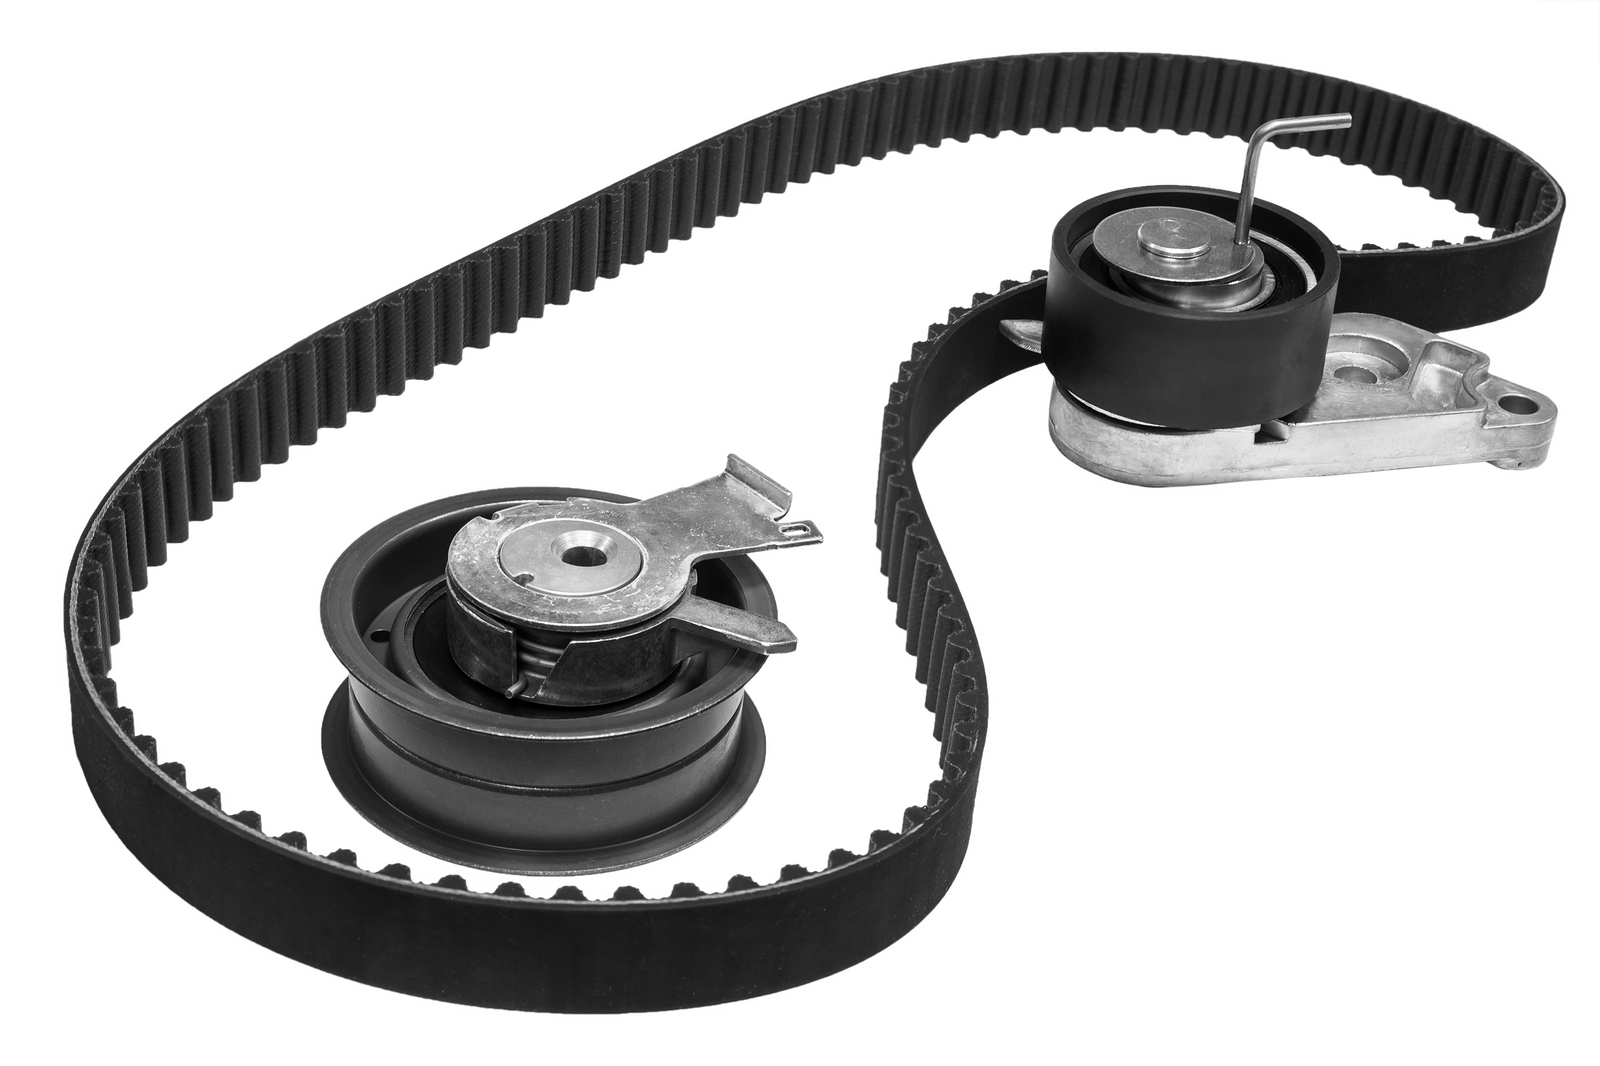 Angel's Transmission & Auto Repair Blog - Timing Belt Replacement